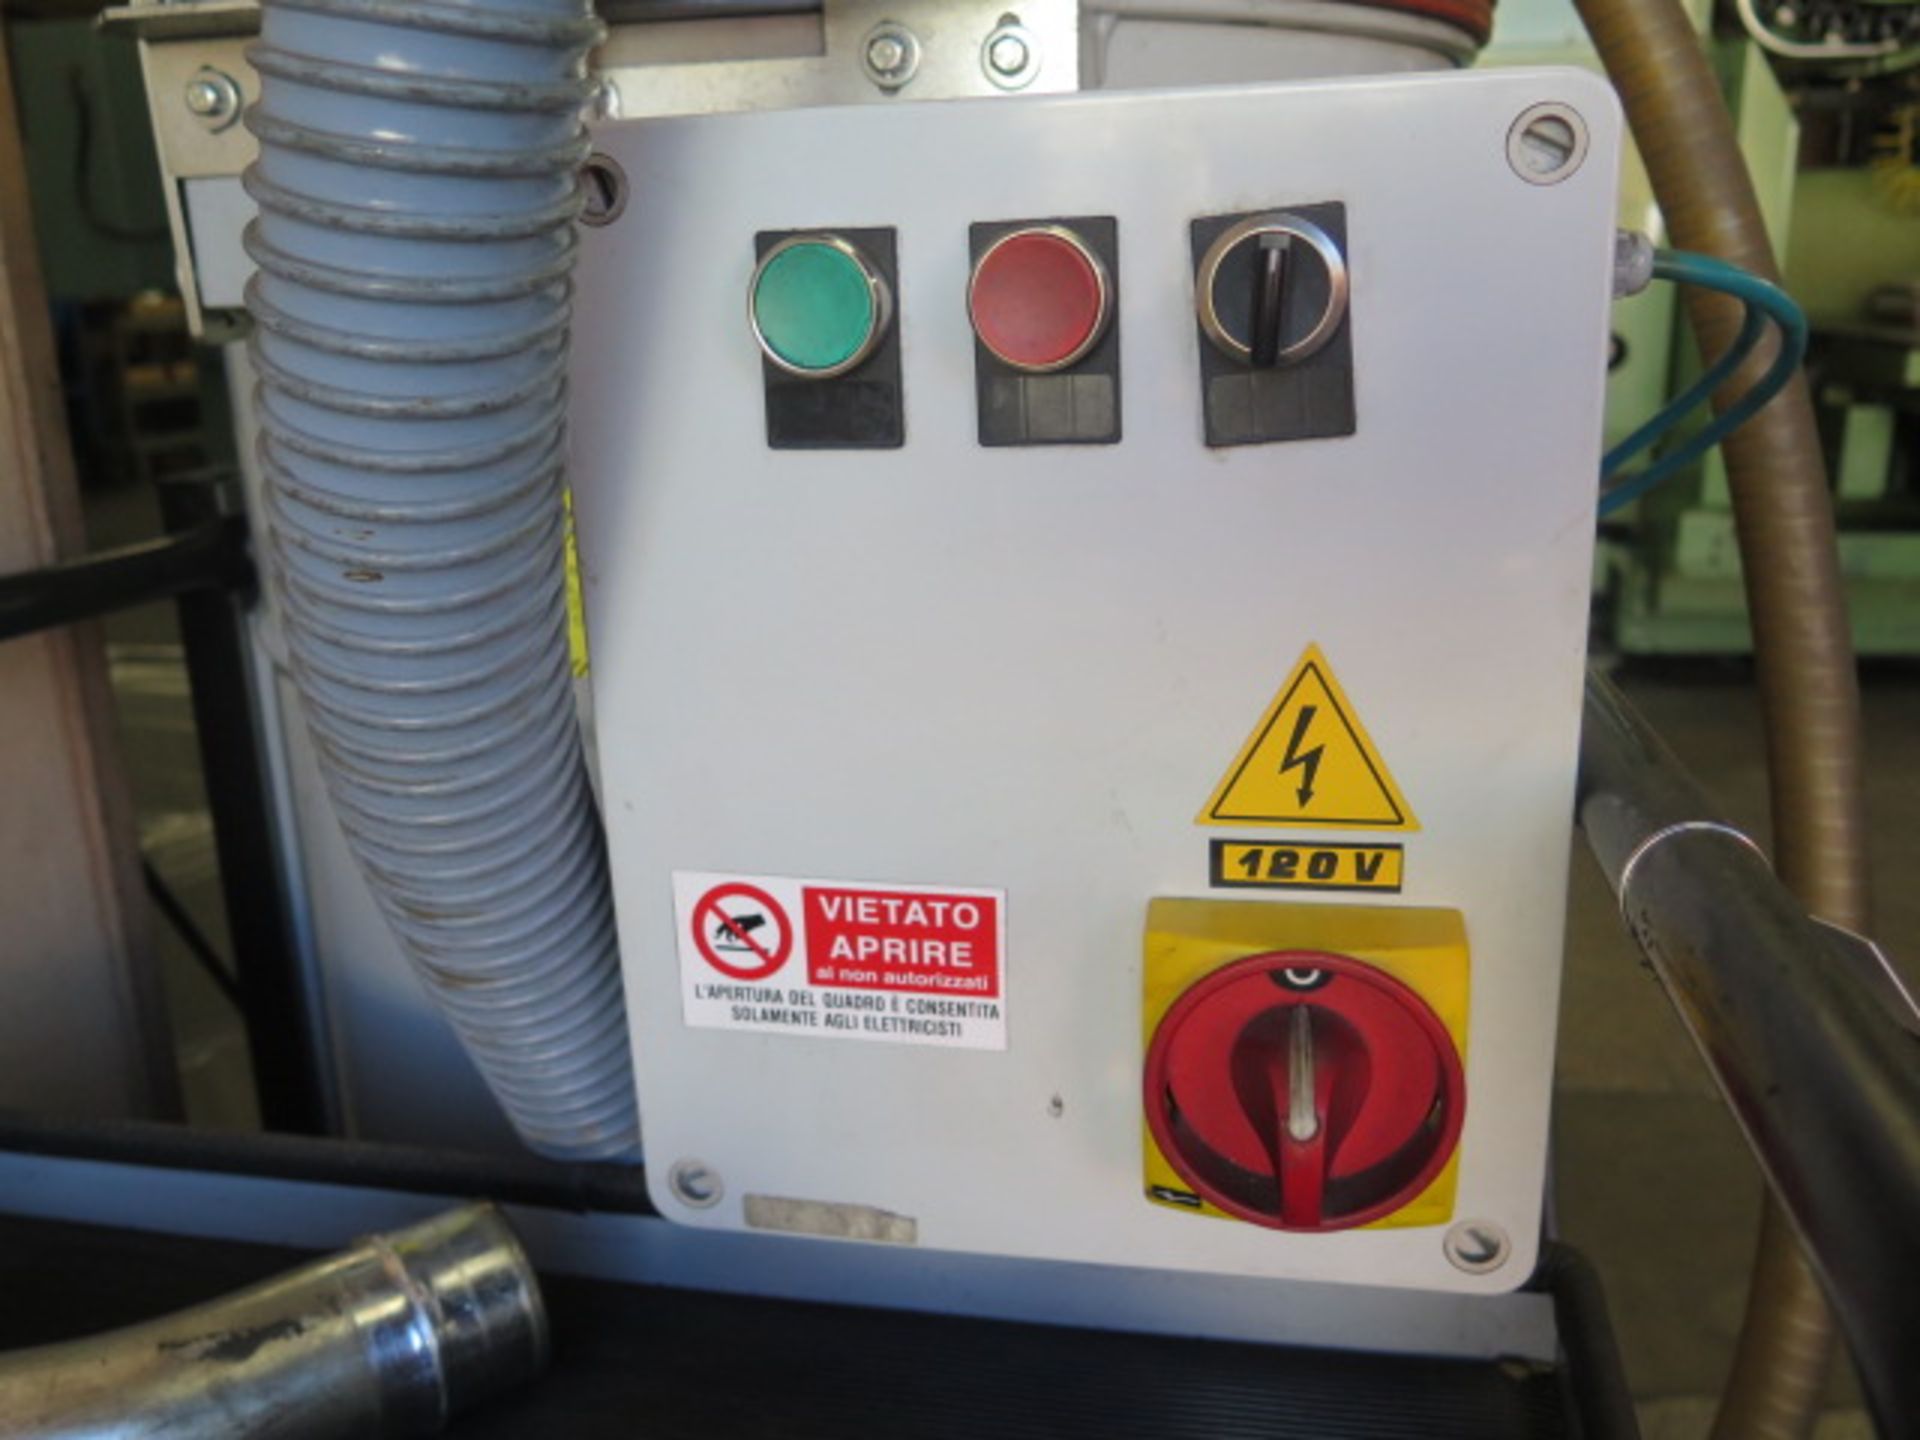 Nilfisk CFM Type ECO-10613 Industrial Vacuum s/n 16AI177 (SOLD AS-IS - NO WARRANTY) - Image 5 of 8